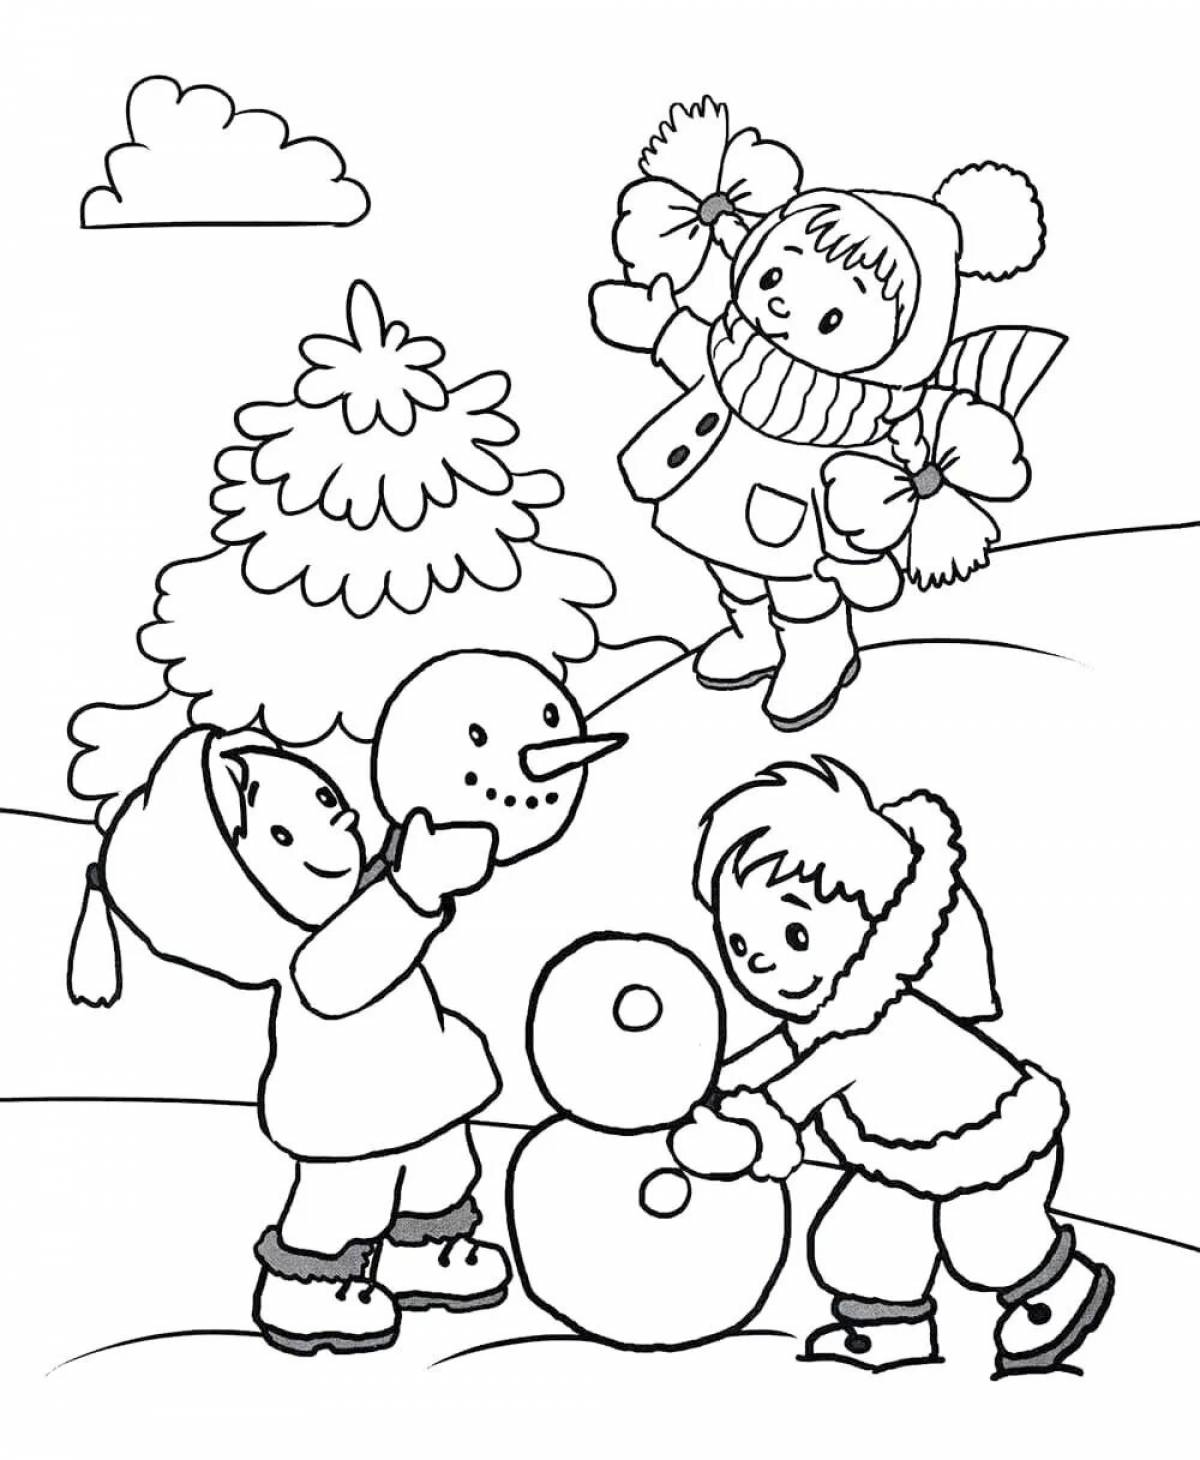 Winter games for kids #5